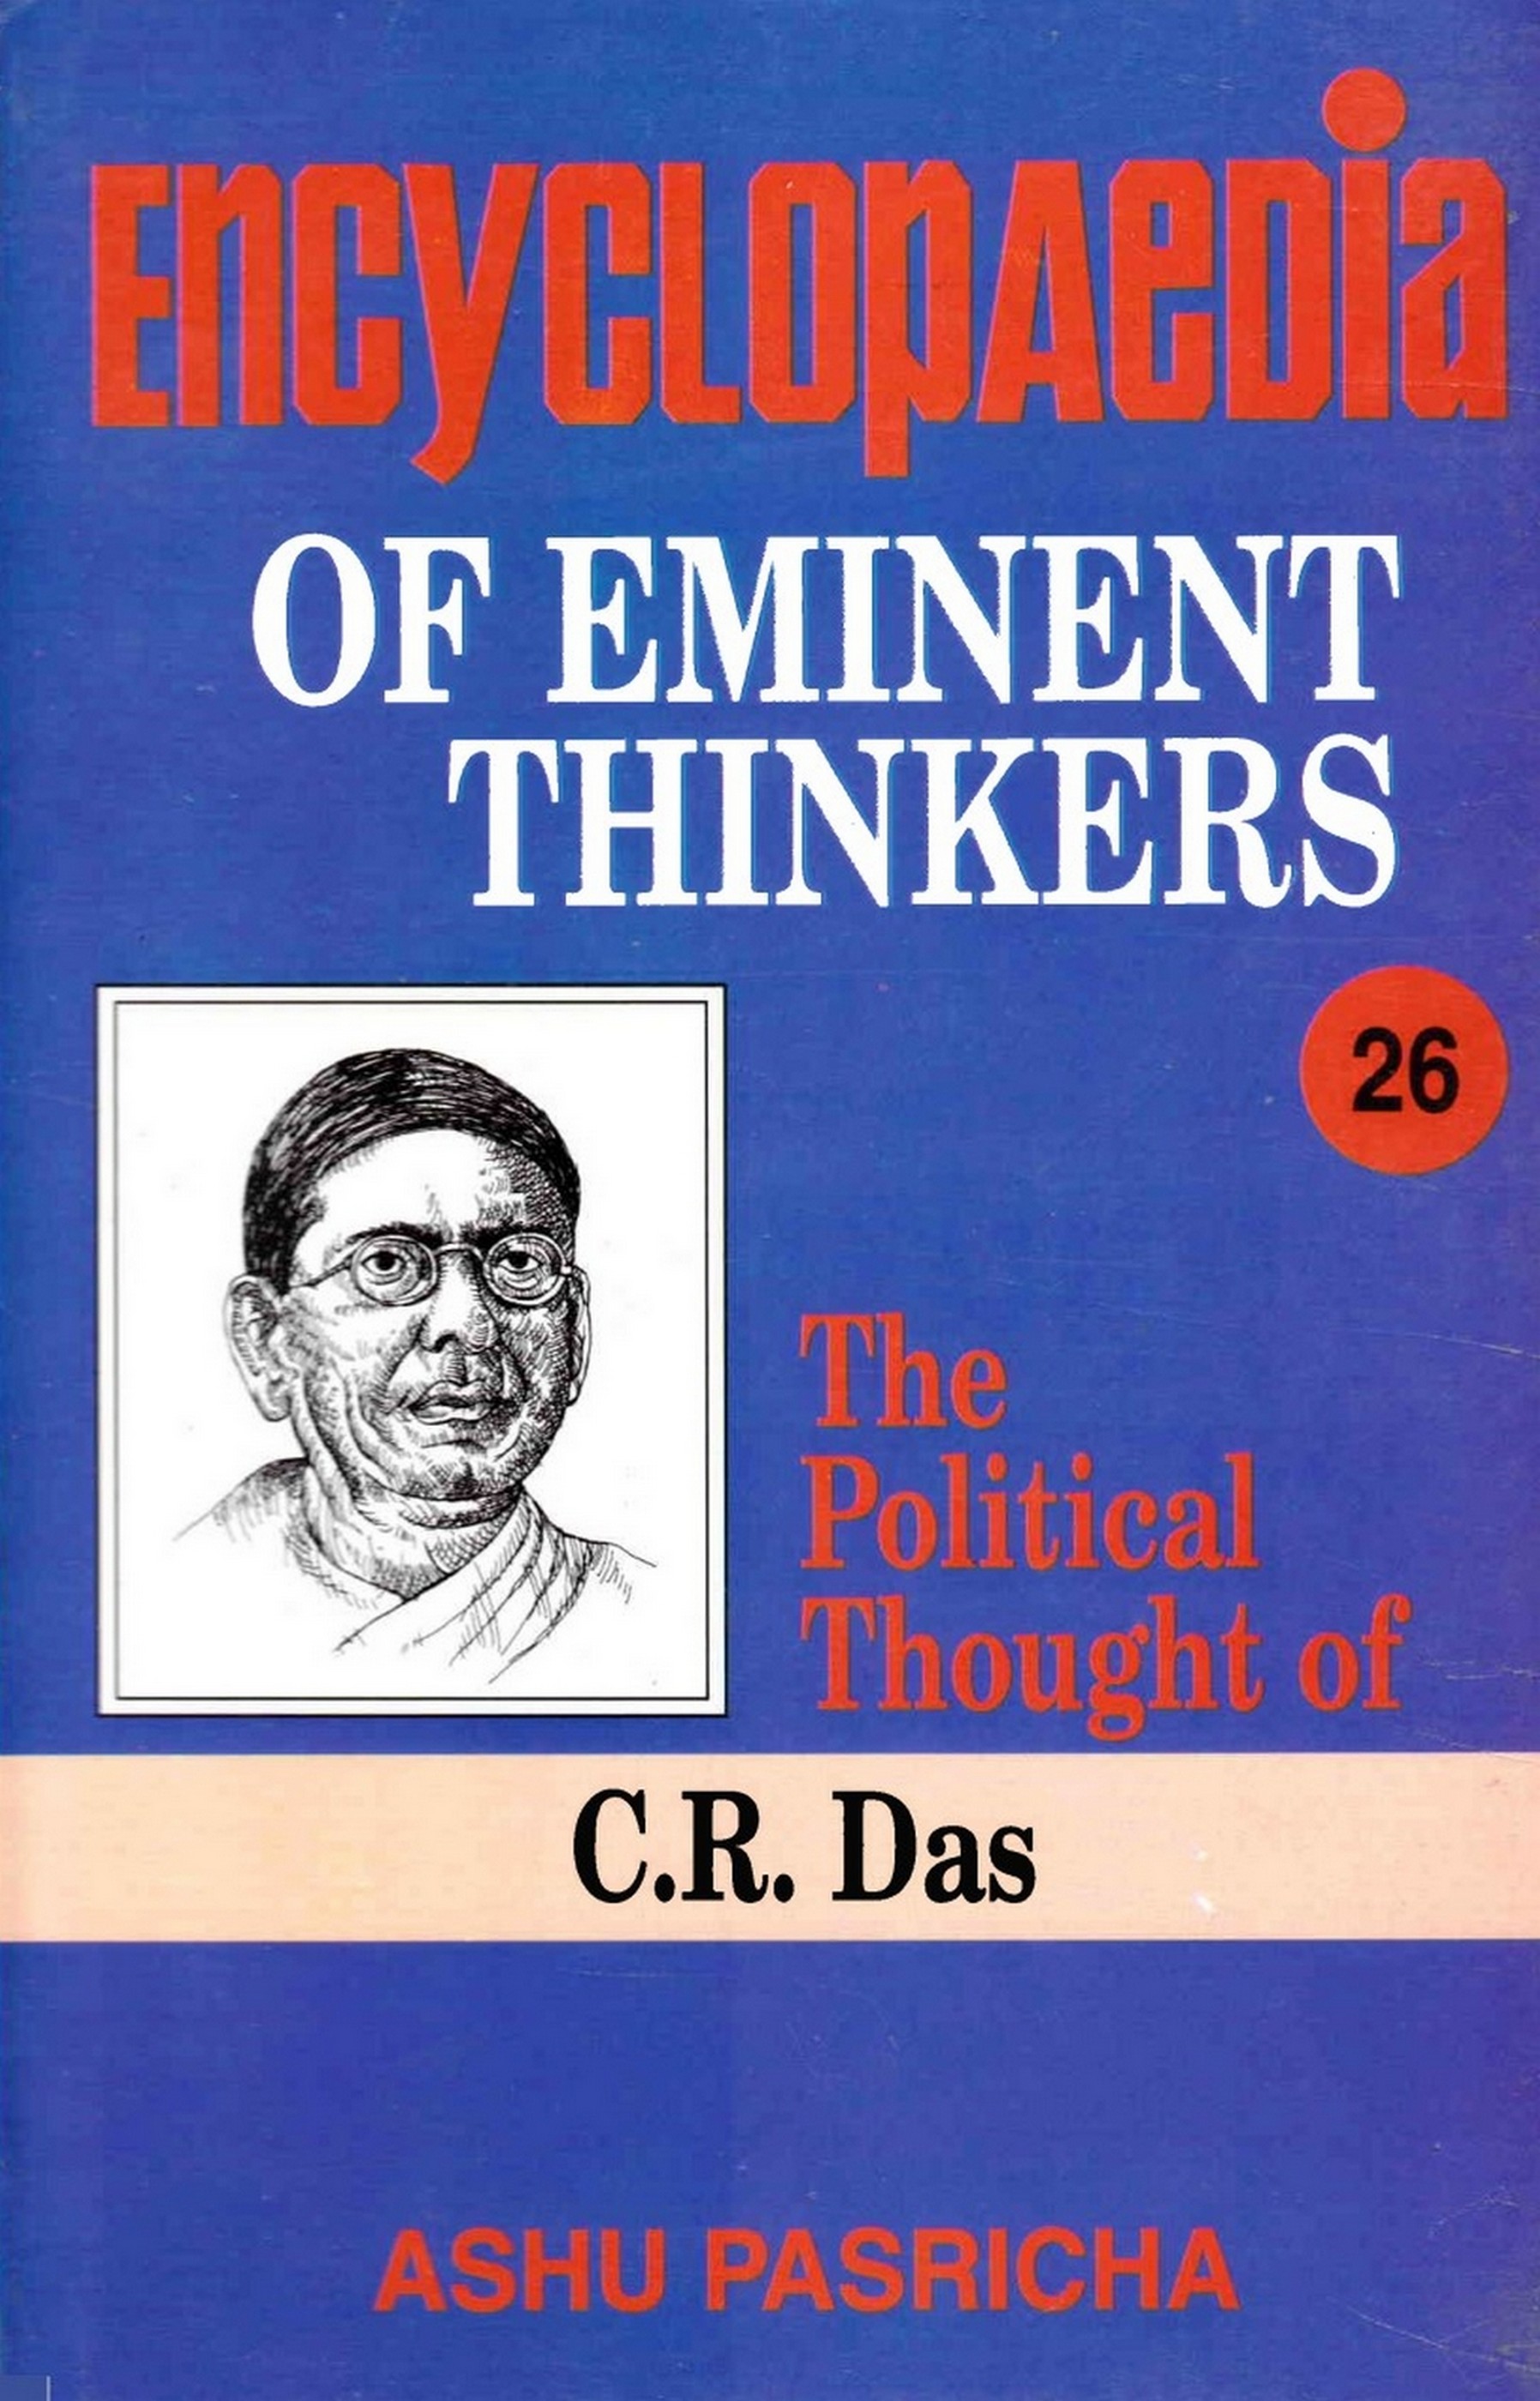 Encyclopaedia of Eminent Thinkers Volume-26 (The Political Thought of C.R. Das)